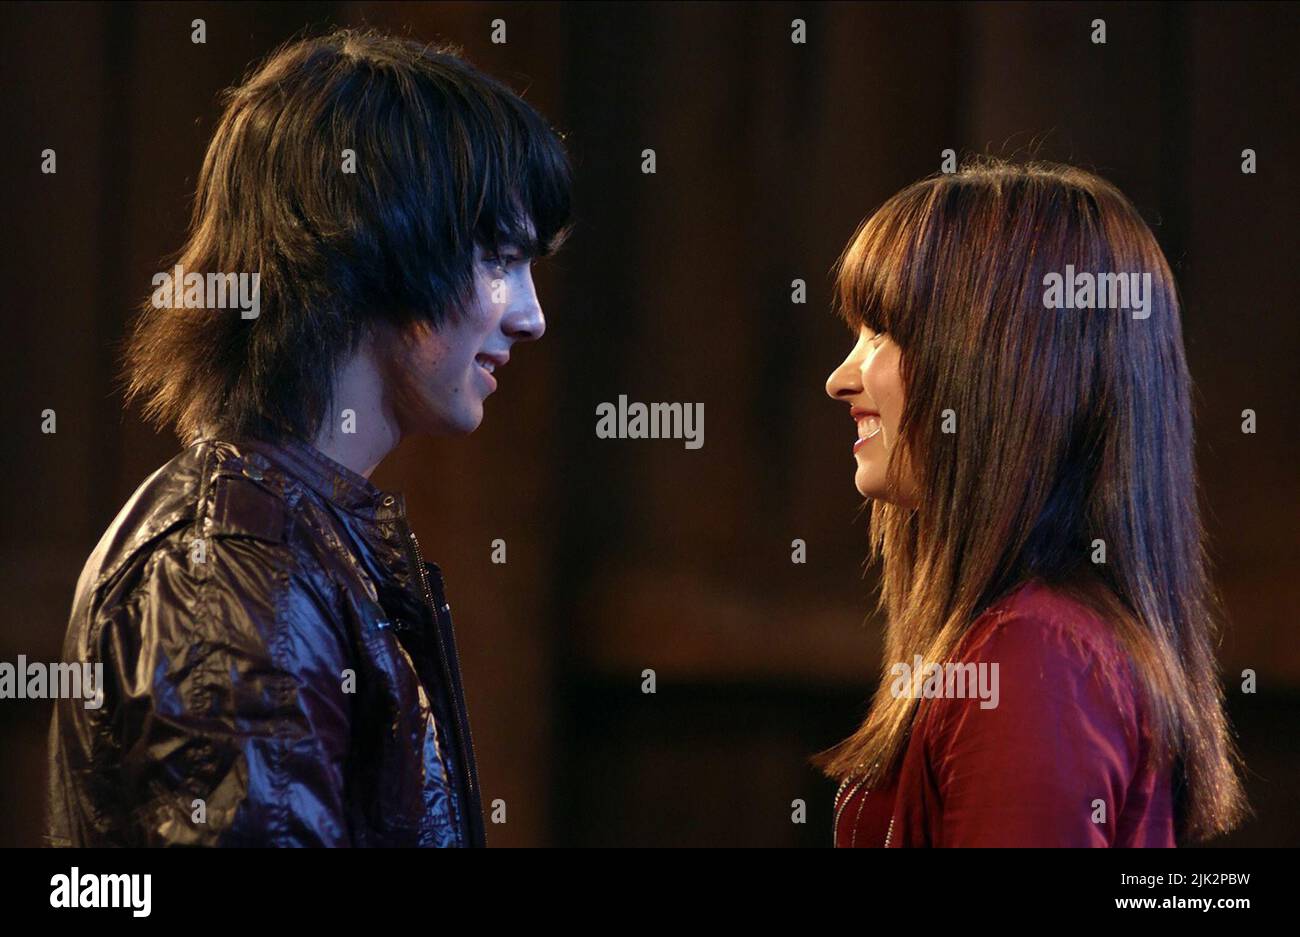 JONAS LOVATO, CAMP ROCK, 2008, Banque D'Images